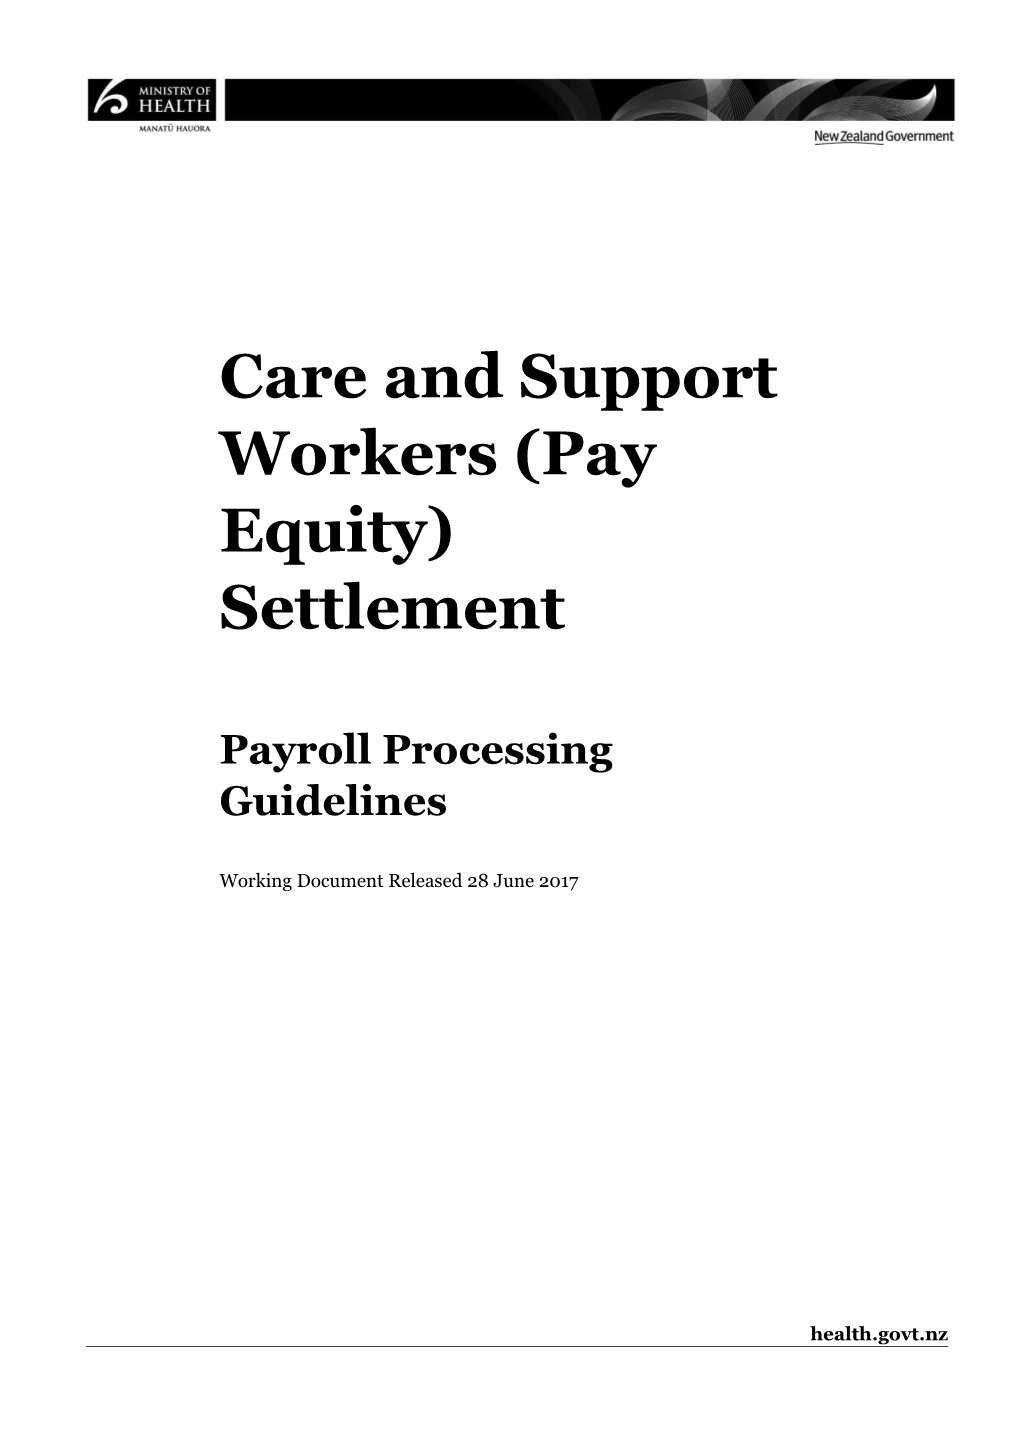 Care and Support Workers (Pay Equity) Operational Policy Document for Community Residential